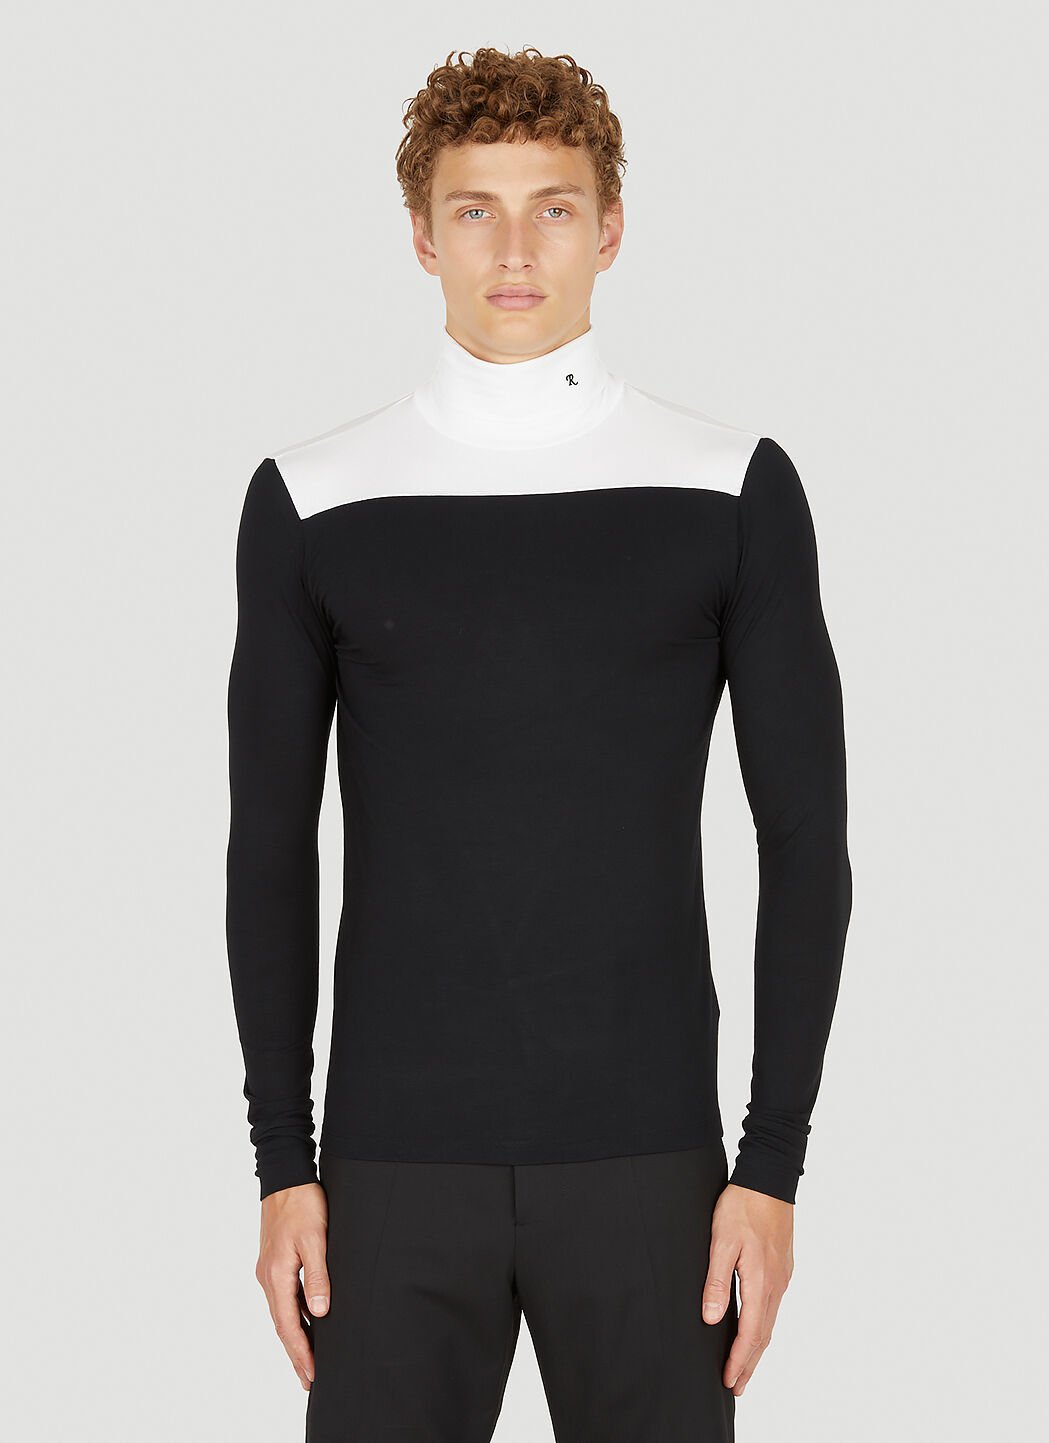 Raf Simons x Fred Perry Colour Block Long Sleeved Top Black rsf0152002